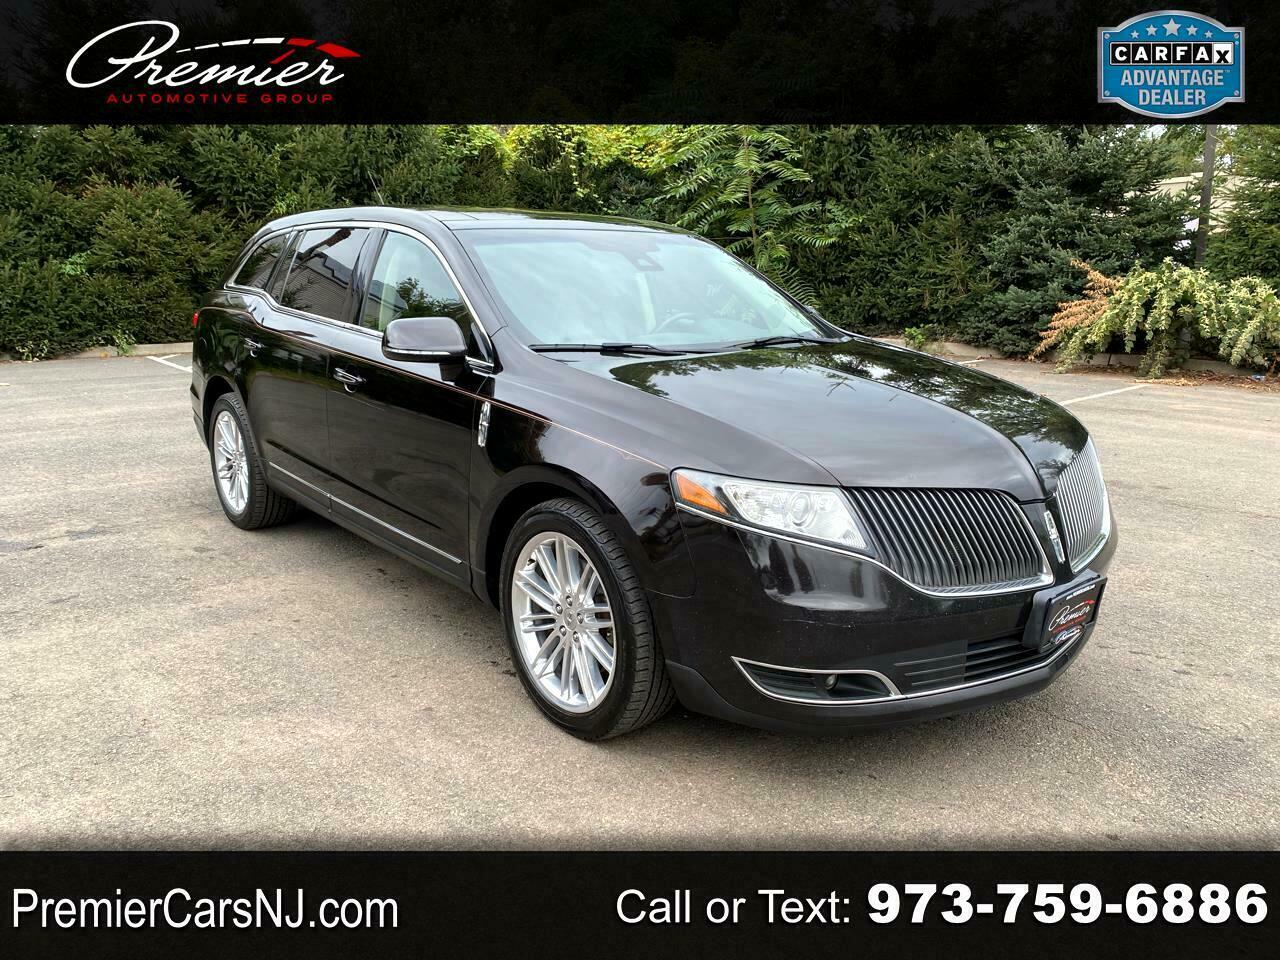 2014 Lincoln Mkt Ecoboost 2014 Lincoln Mkt, Black Cherry With 153993 Miles Available Now!